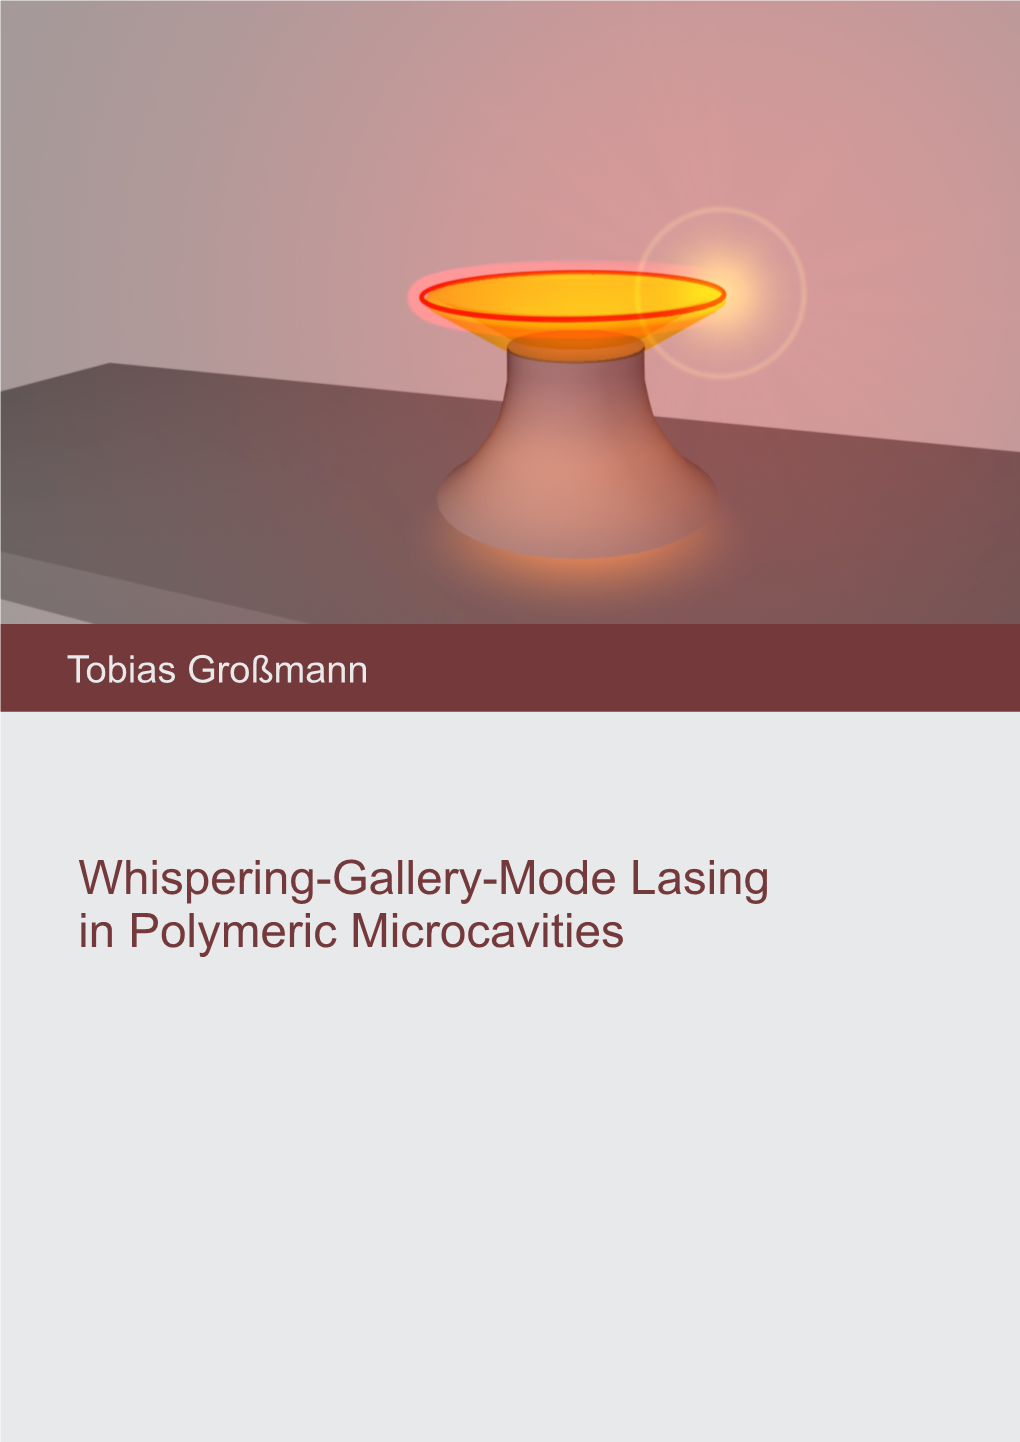 Whispering-Gallery-Mode Lasing in Polymeric Microcavities Whispering-Gallery-Mode Lasing in Polymeric Microcavities